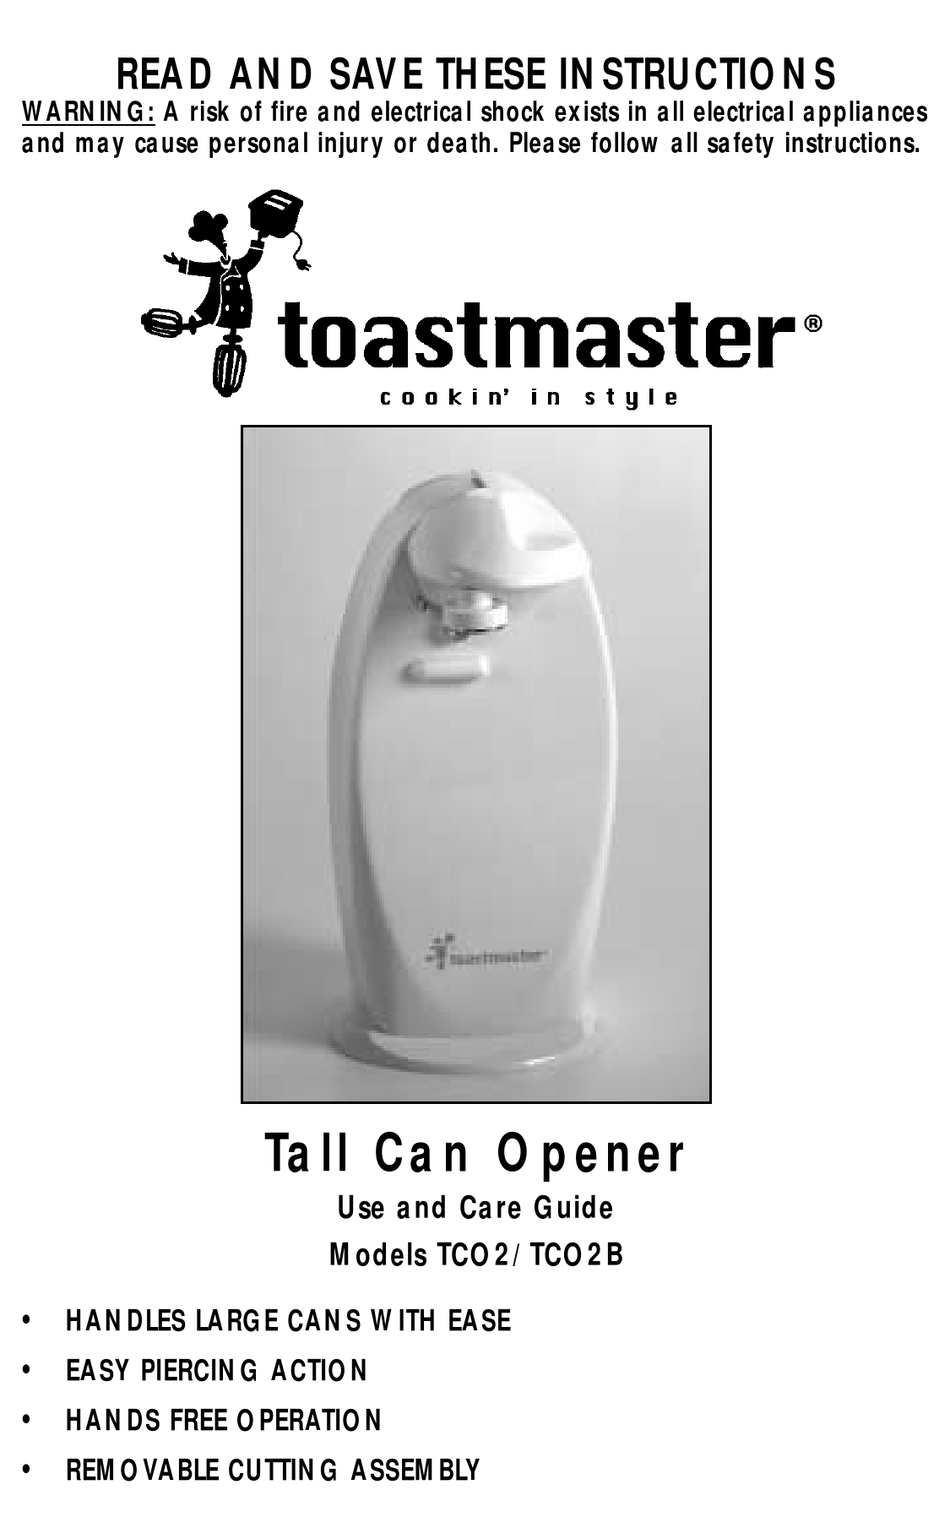 https://data2.manualslib.com/first-image/i4/18/1711/171075/toastmaster-tco2.png